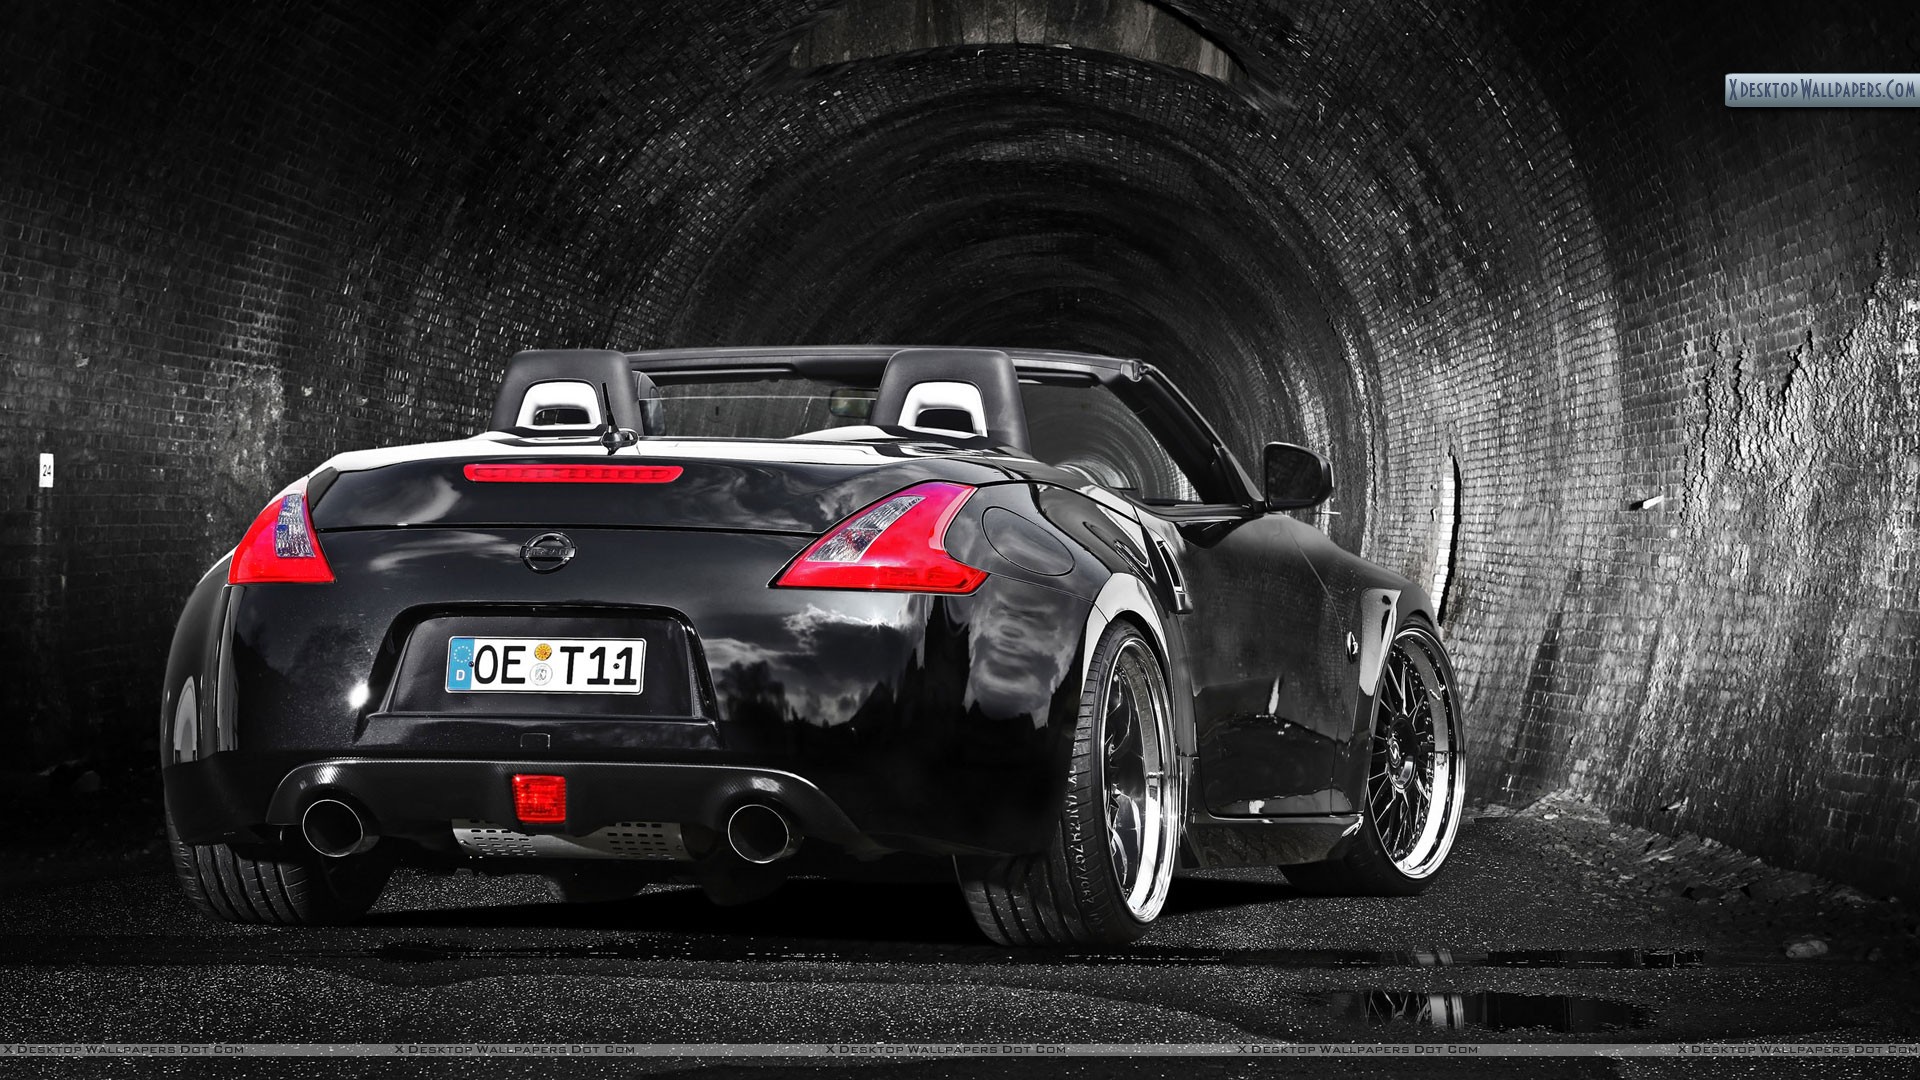 Nissan 370Z Wallpapers, Photos & Images in HD